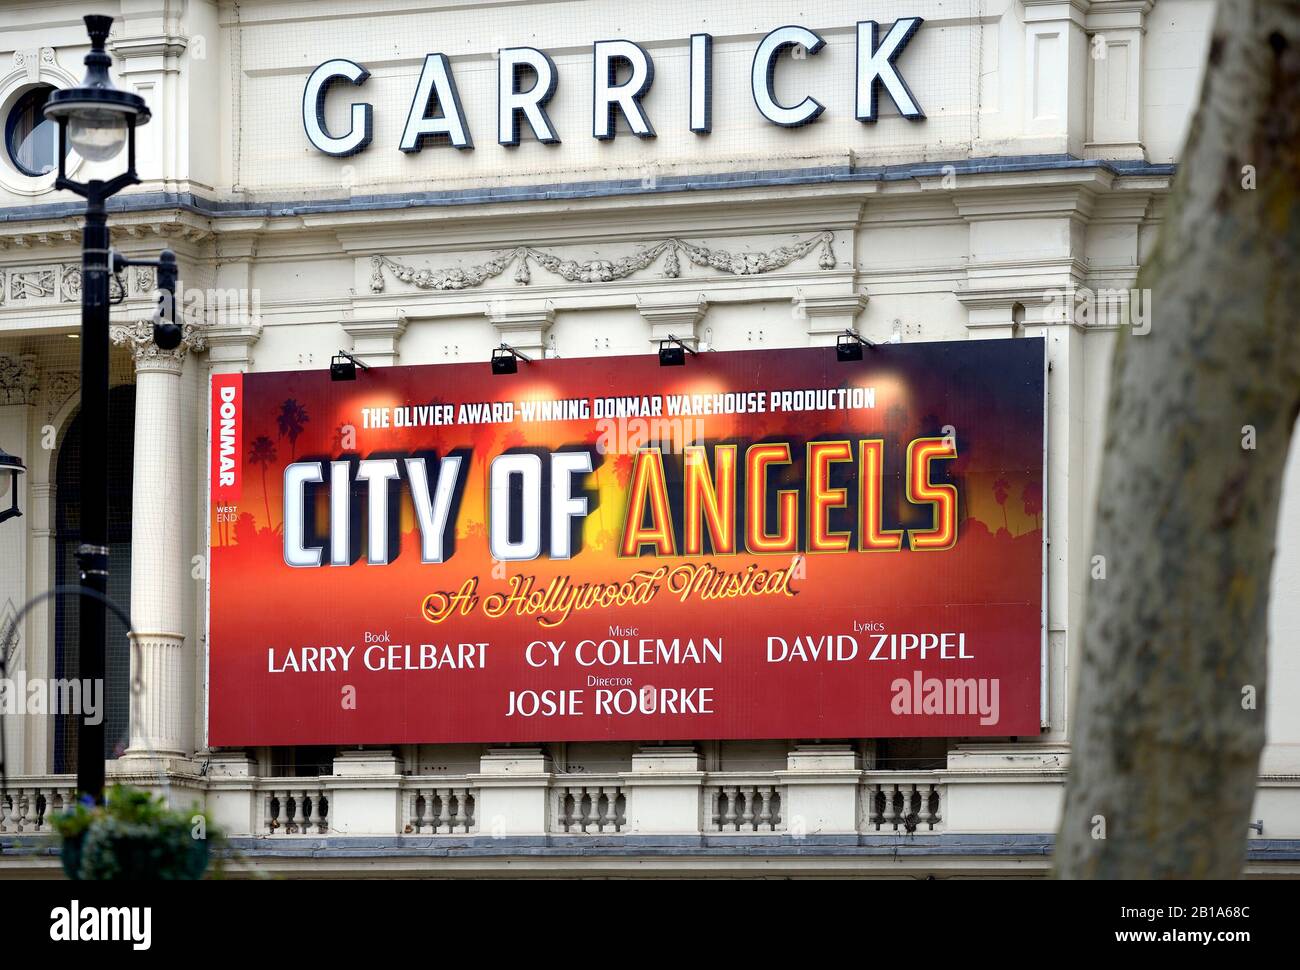 London, England, UK. 'City of Angels' musical at the Garrick Theatre (Feb 2020) Stock Photo